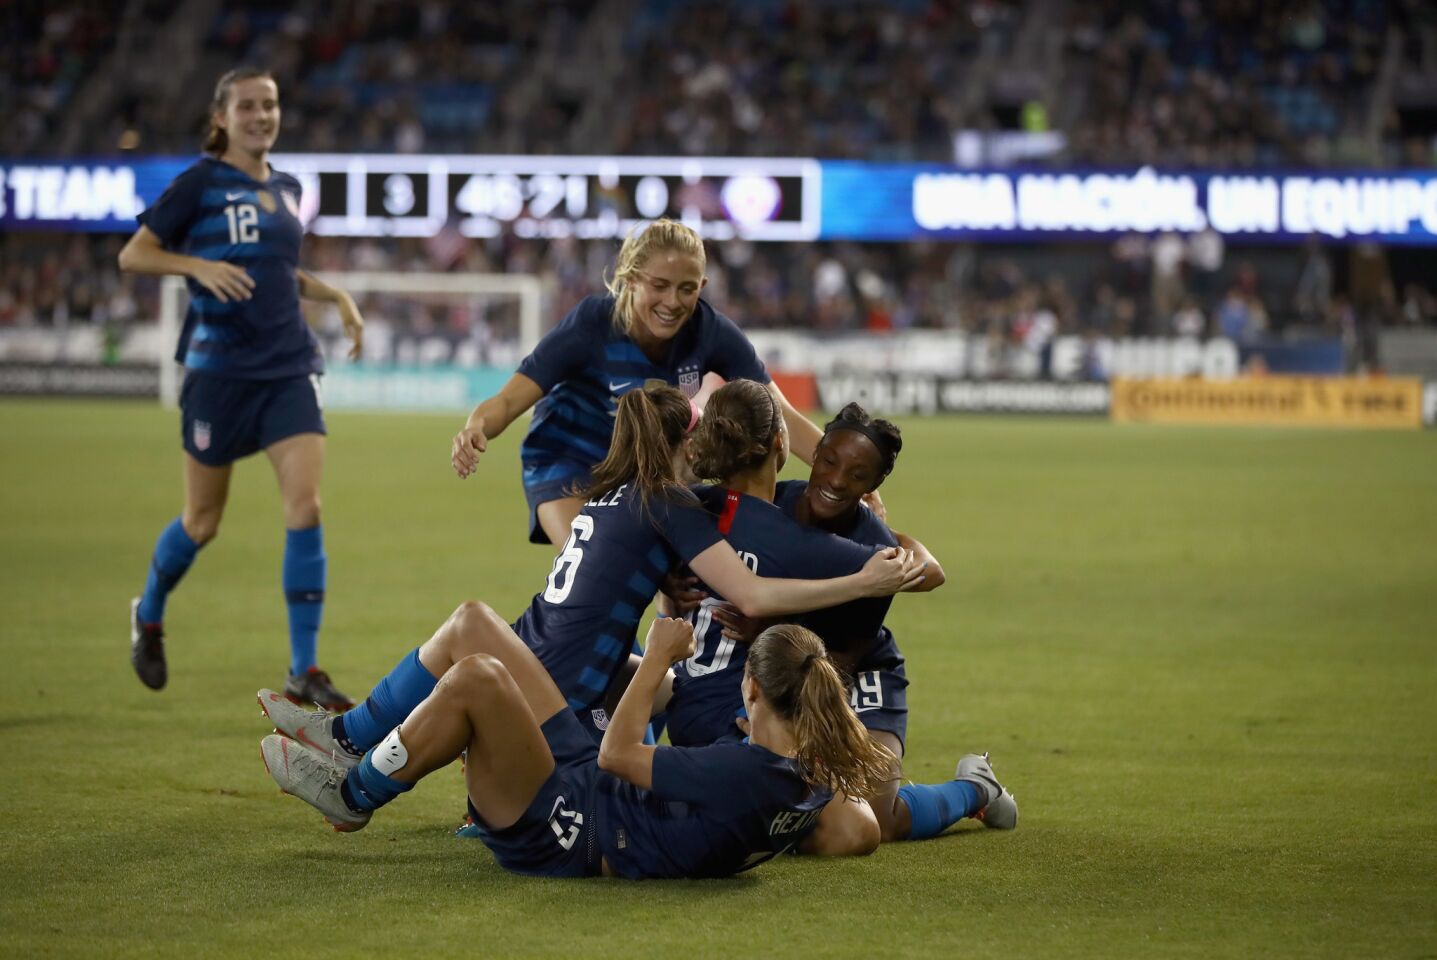 SAN JOSE, CA - SEPTEMBER 04: Carli Lloyd of the United States is congratulated by teammates her first goal of the night against Chile during their match at Avaya Stadium on September 4, 2018 in San Jose, California. (Photo by Ezra Shaw/Getty Images) ** OUTS - ELSENT, FPG, CM - OUTS * NM, PH, VA if sourced by CT, LA or MoD **